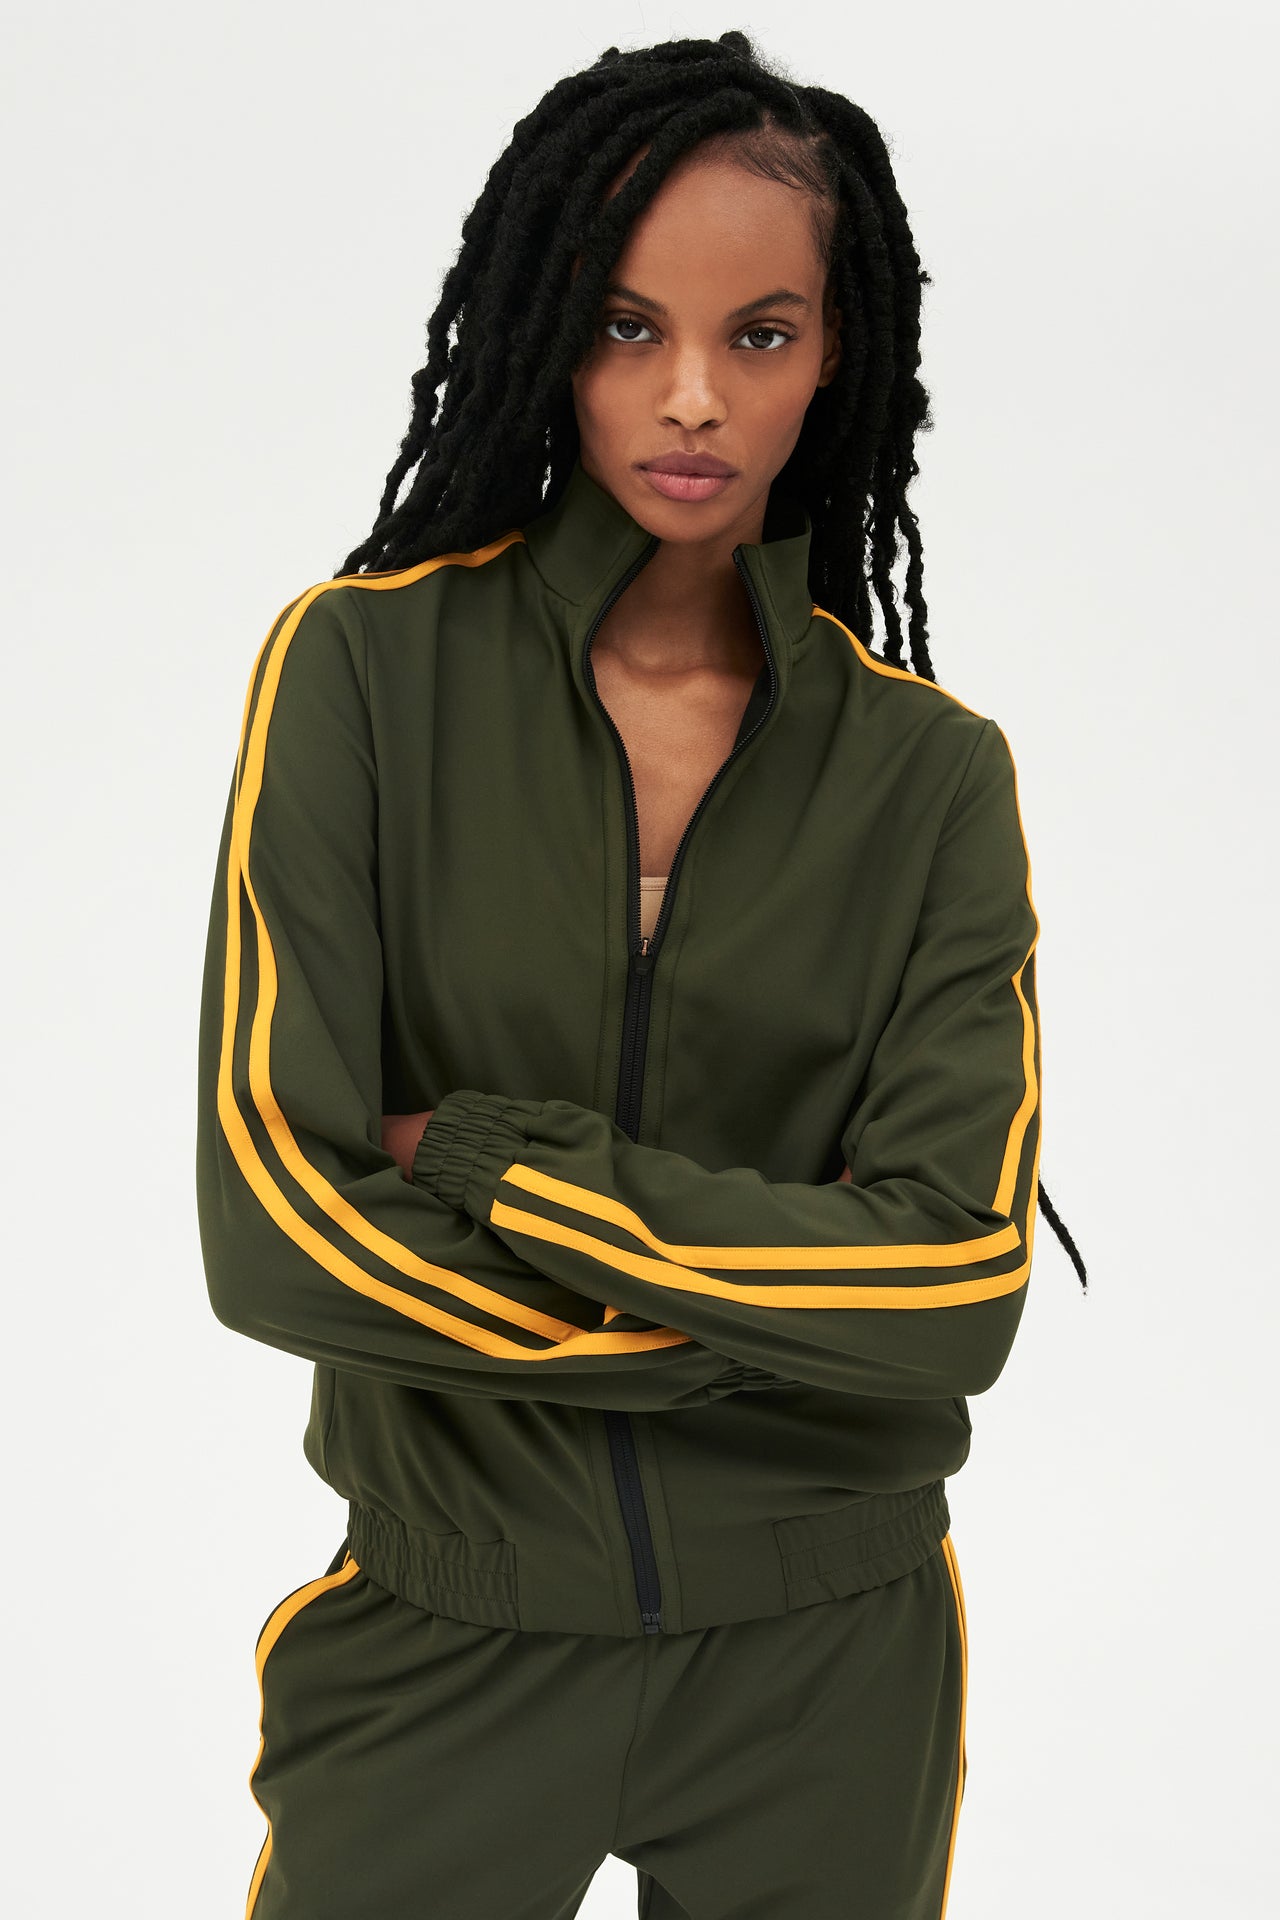 Front view of girl wearing dark green zip jacket that stops under chin with two yellow stripes down the side and a dark green sweatpants